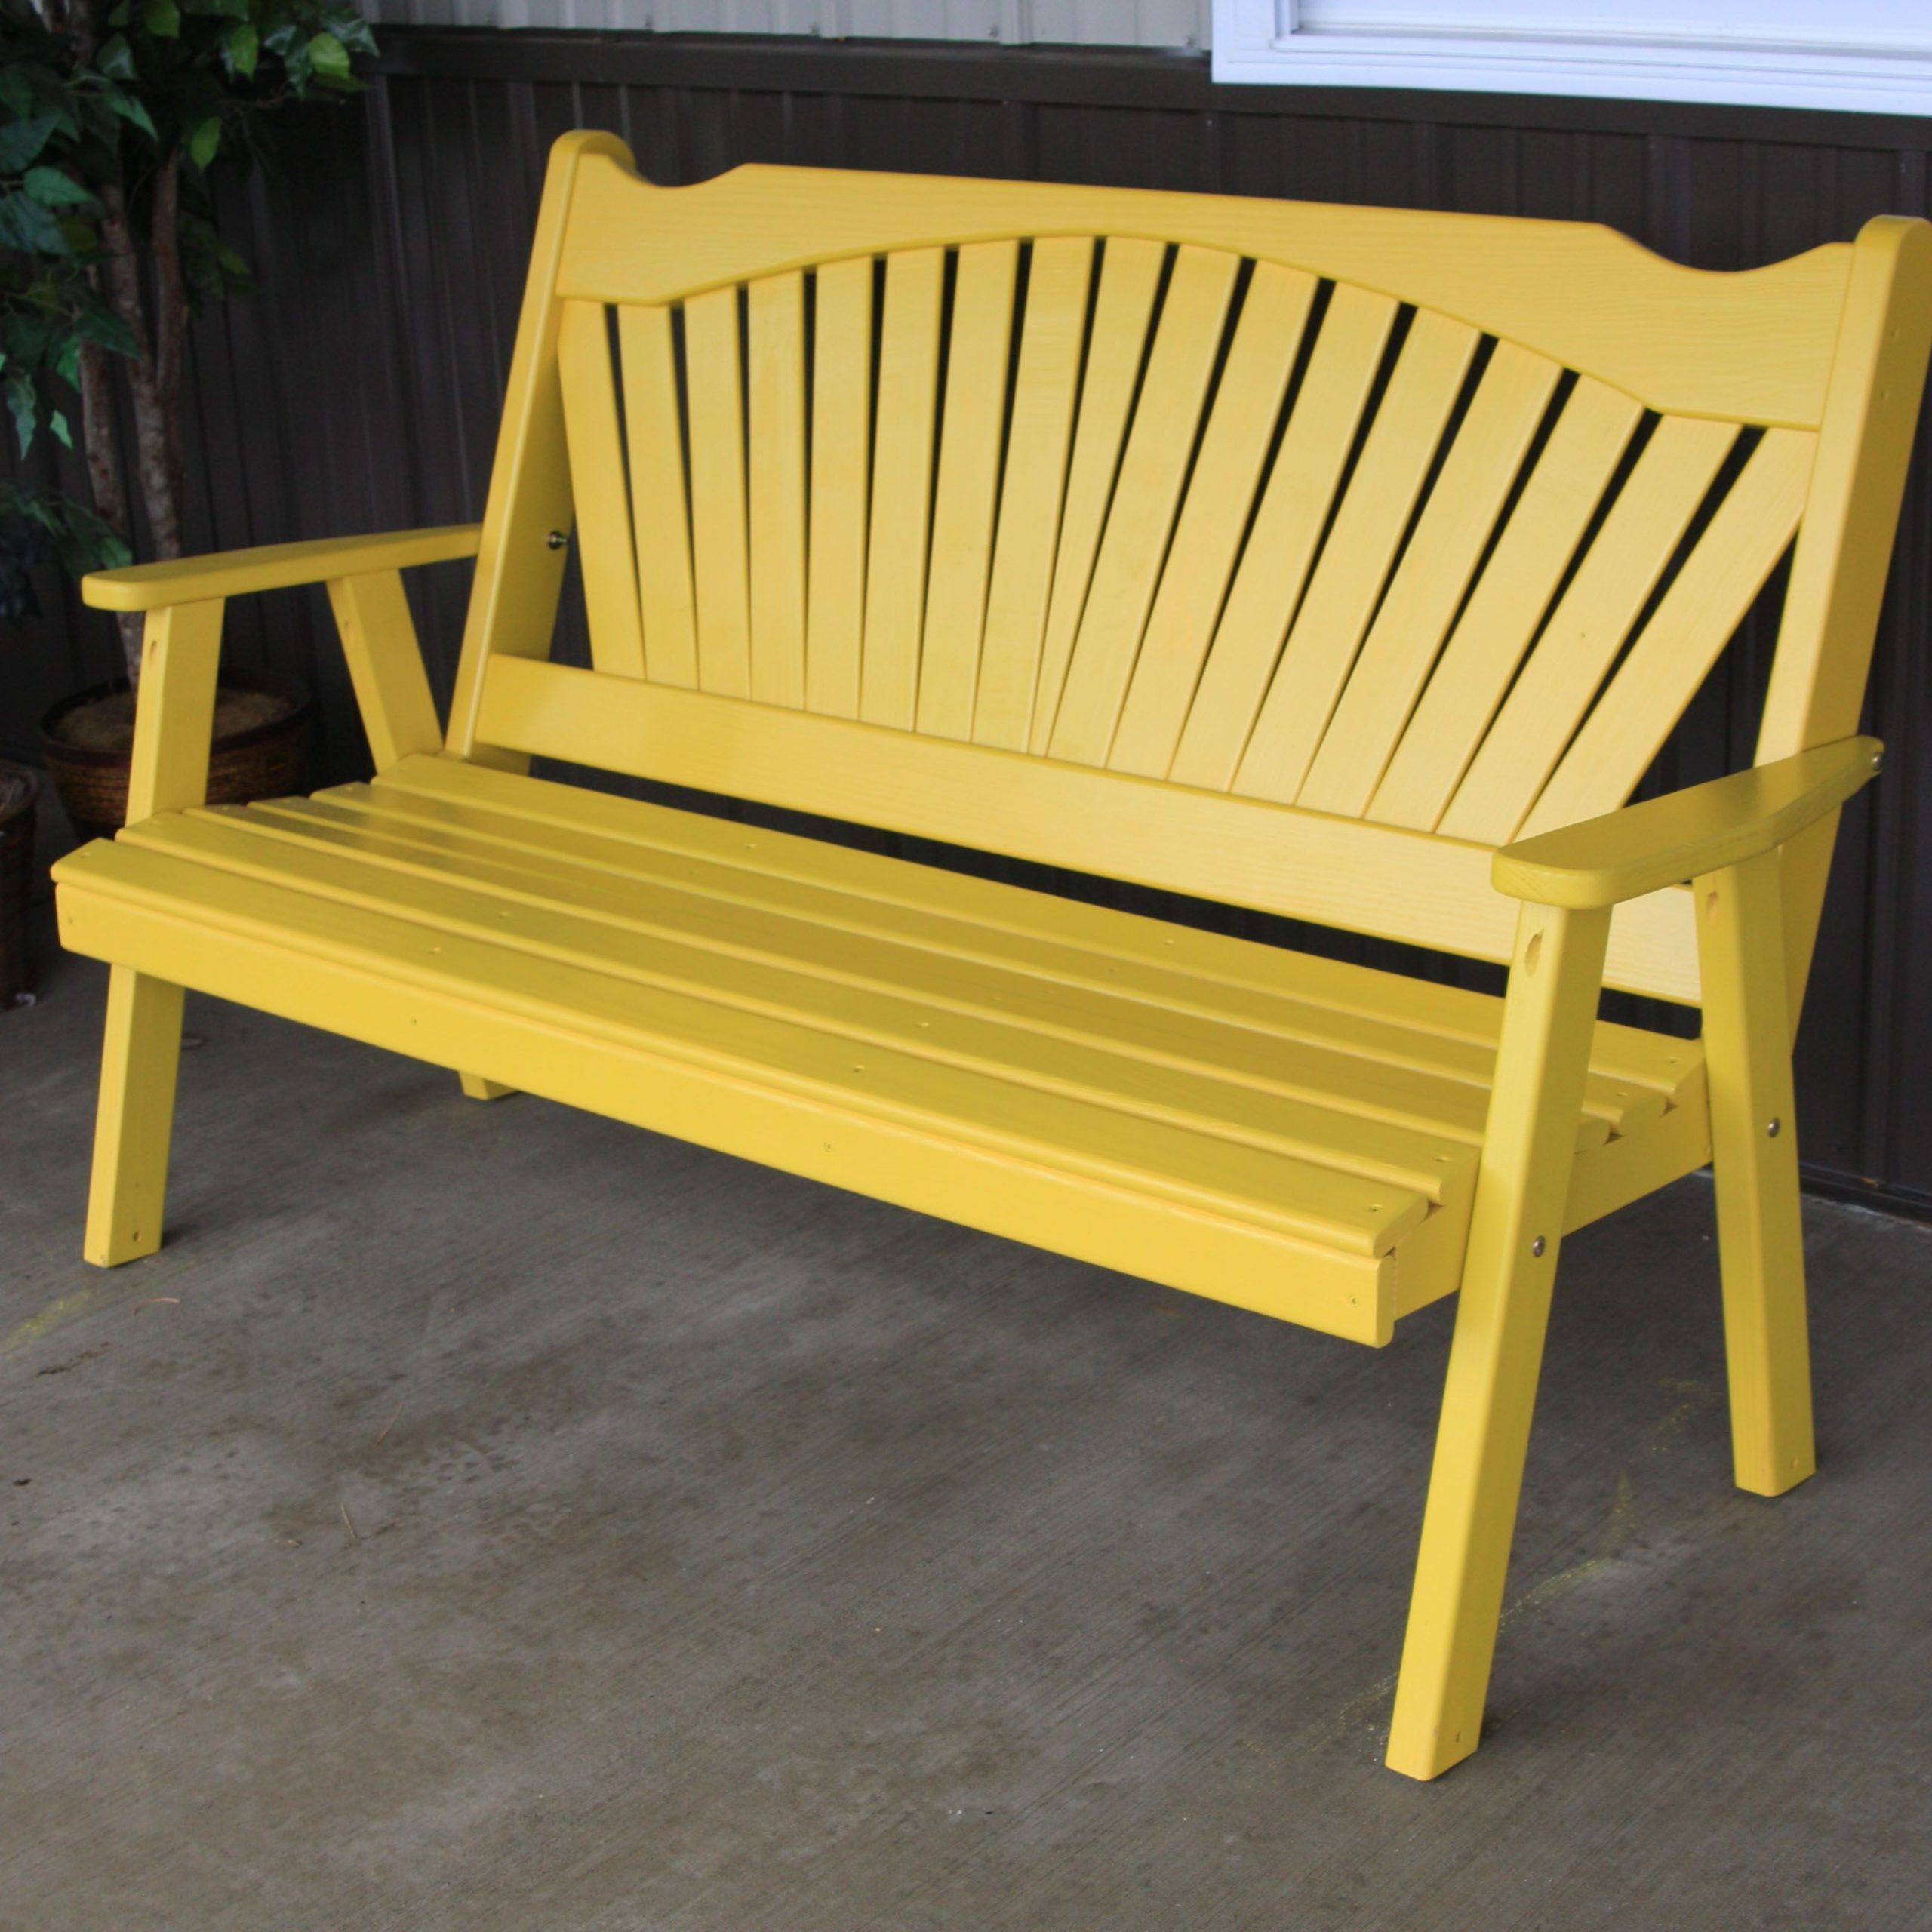 Porch Glider, Porch Intended For Fanback Glider Benches (Photo 3 of 30)